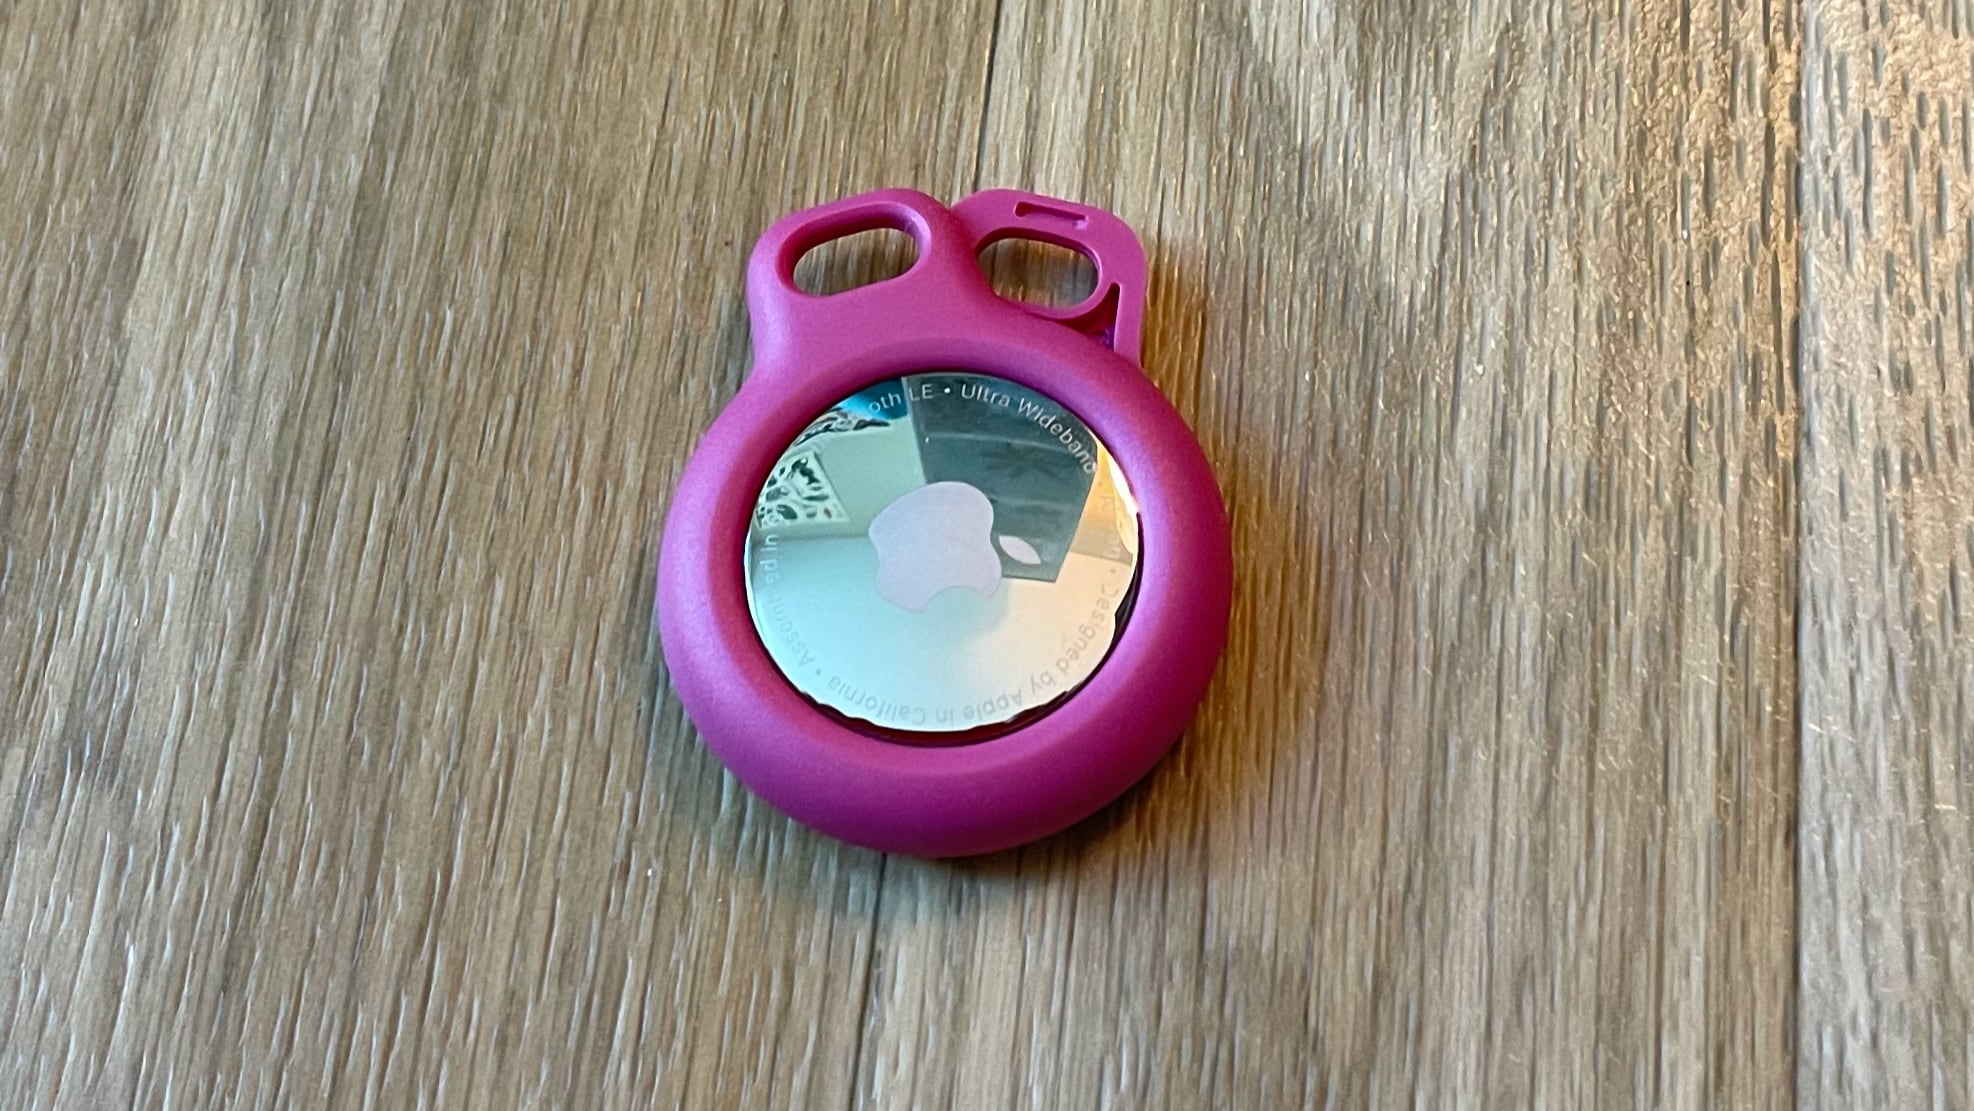 Grip2u Silicone AirTag Key Ring REVIEW - MacSources